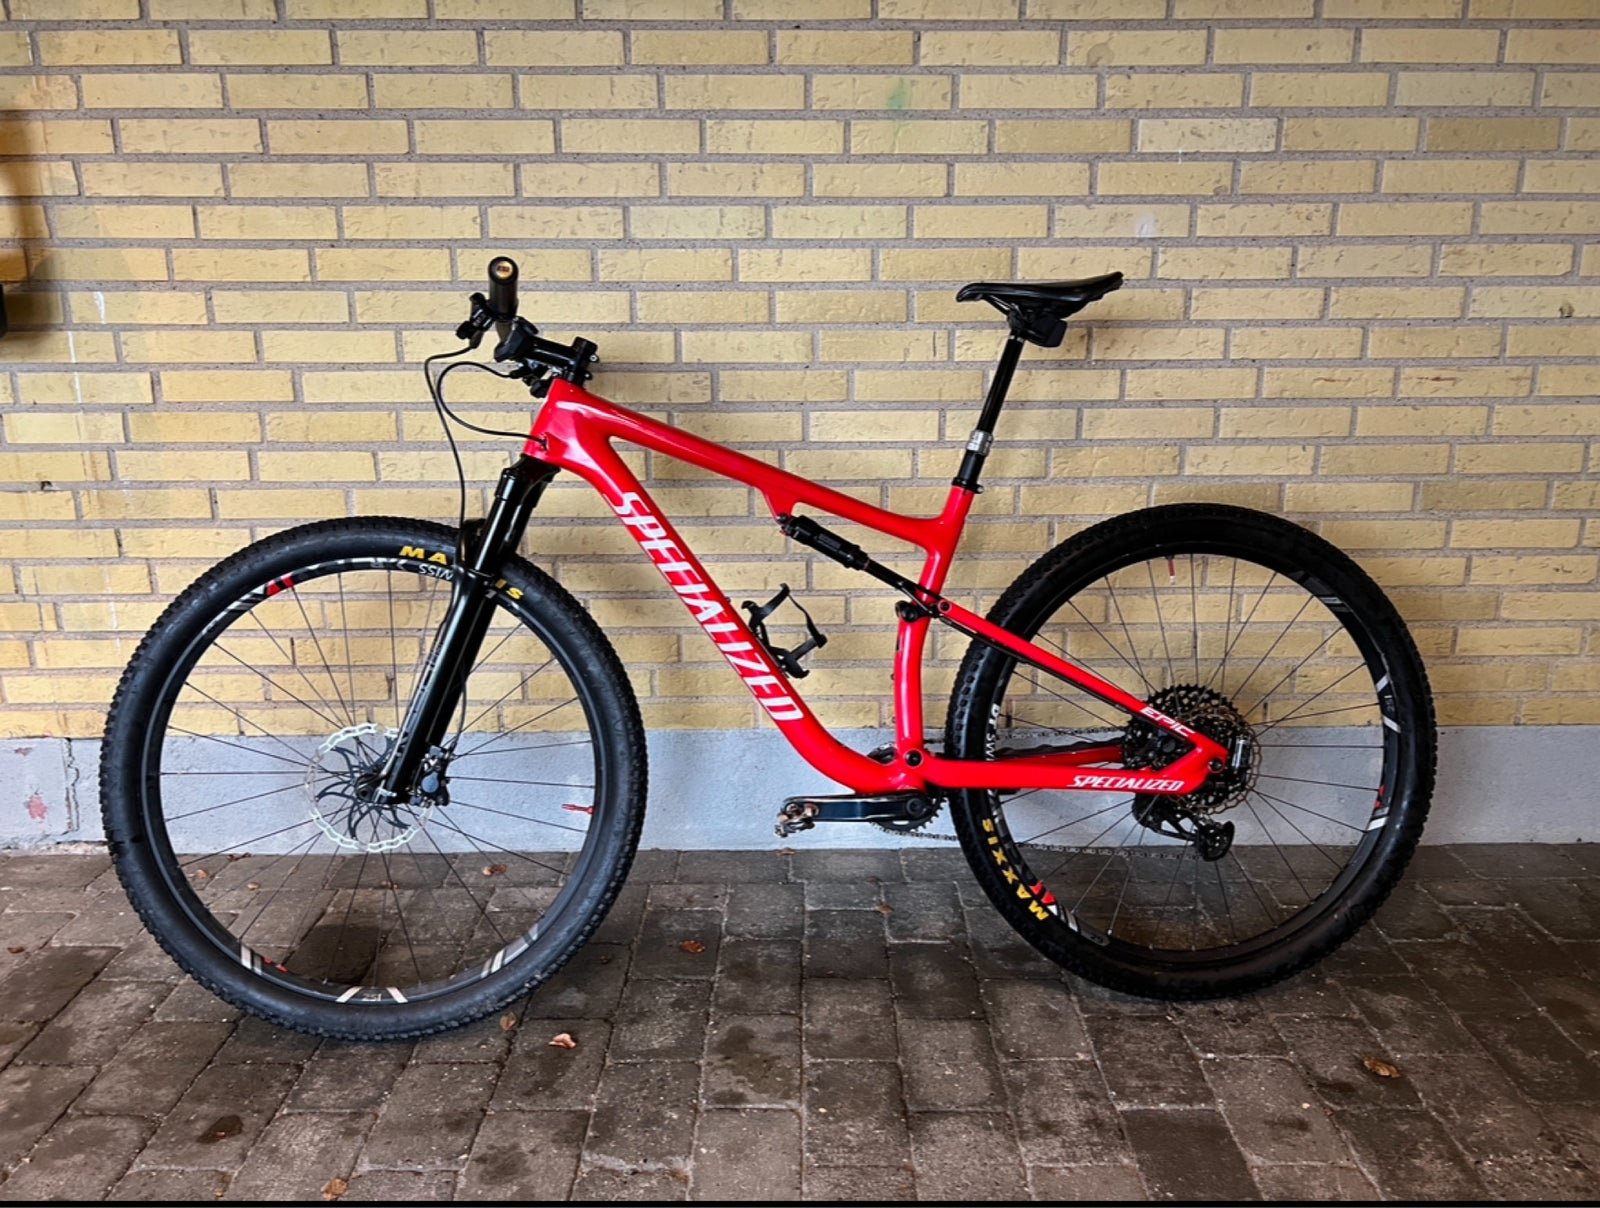 Specialized, full suspension, L tommer